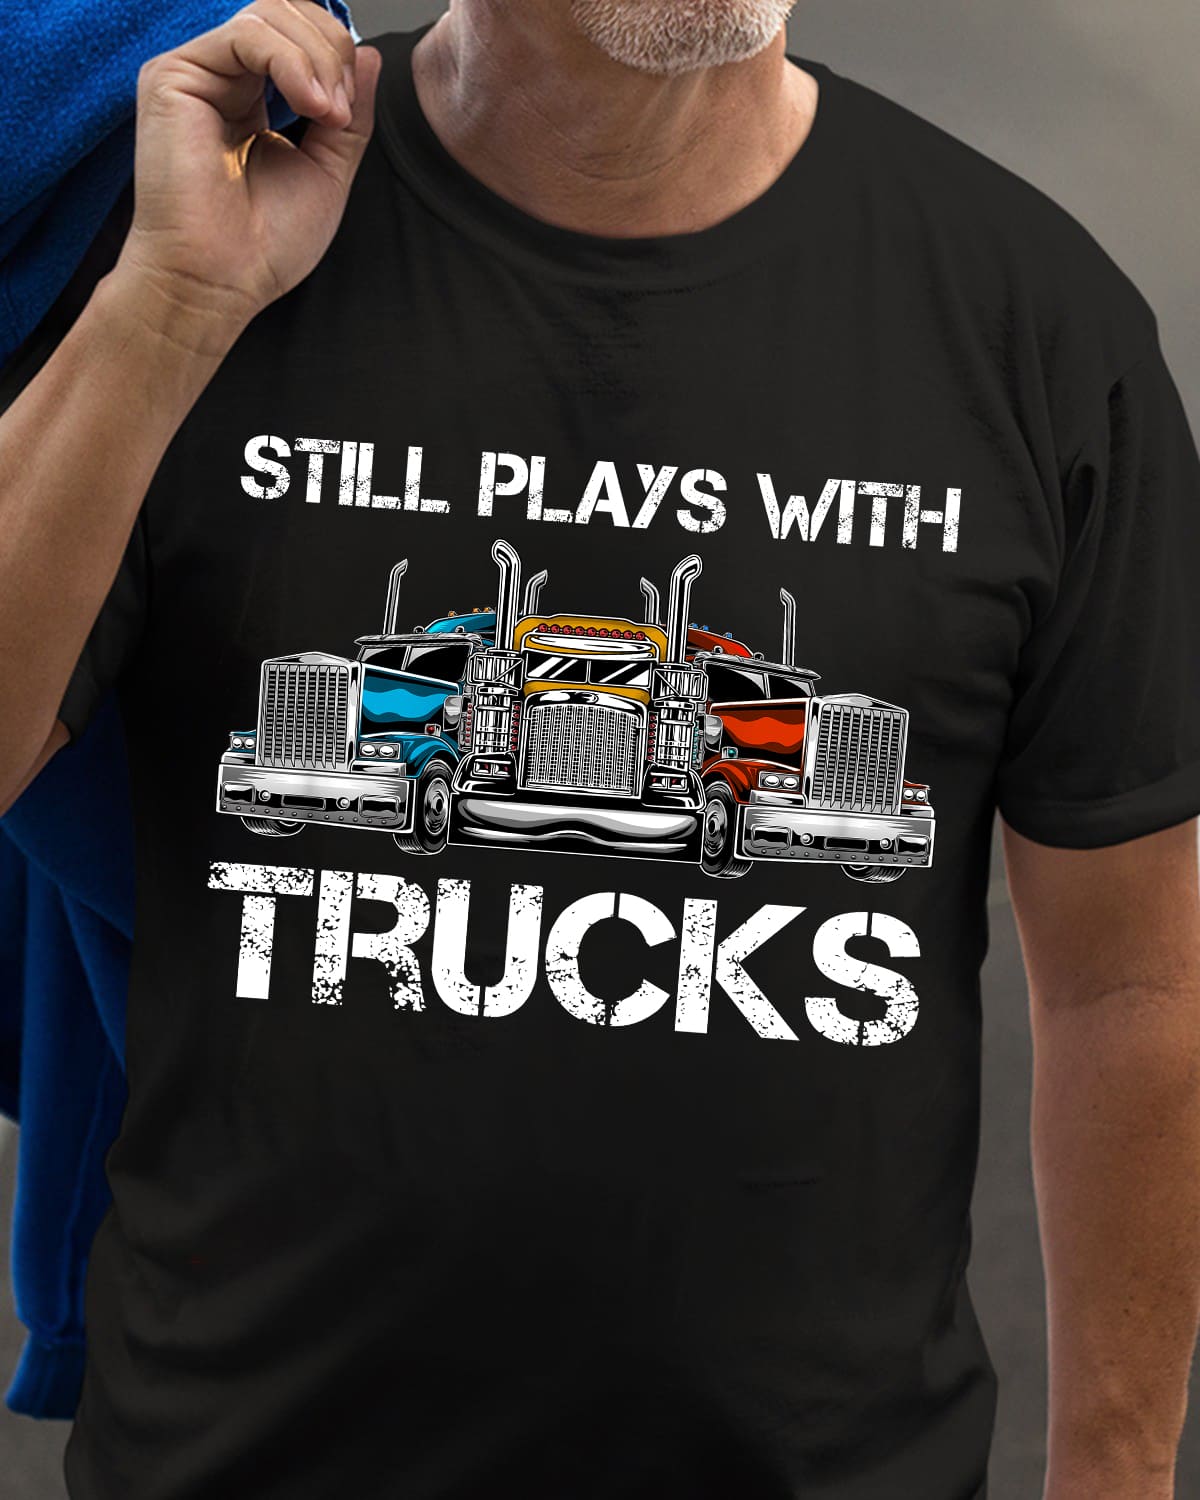 Still plays with trucks - Truck collection, gift for trucker